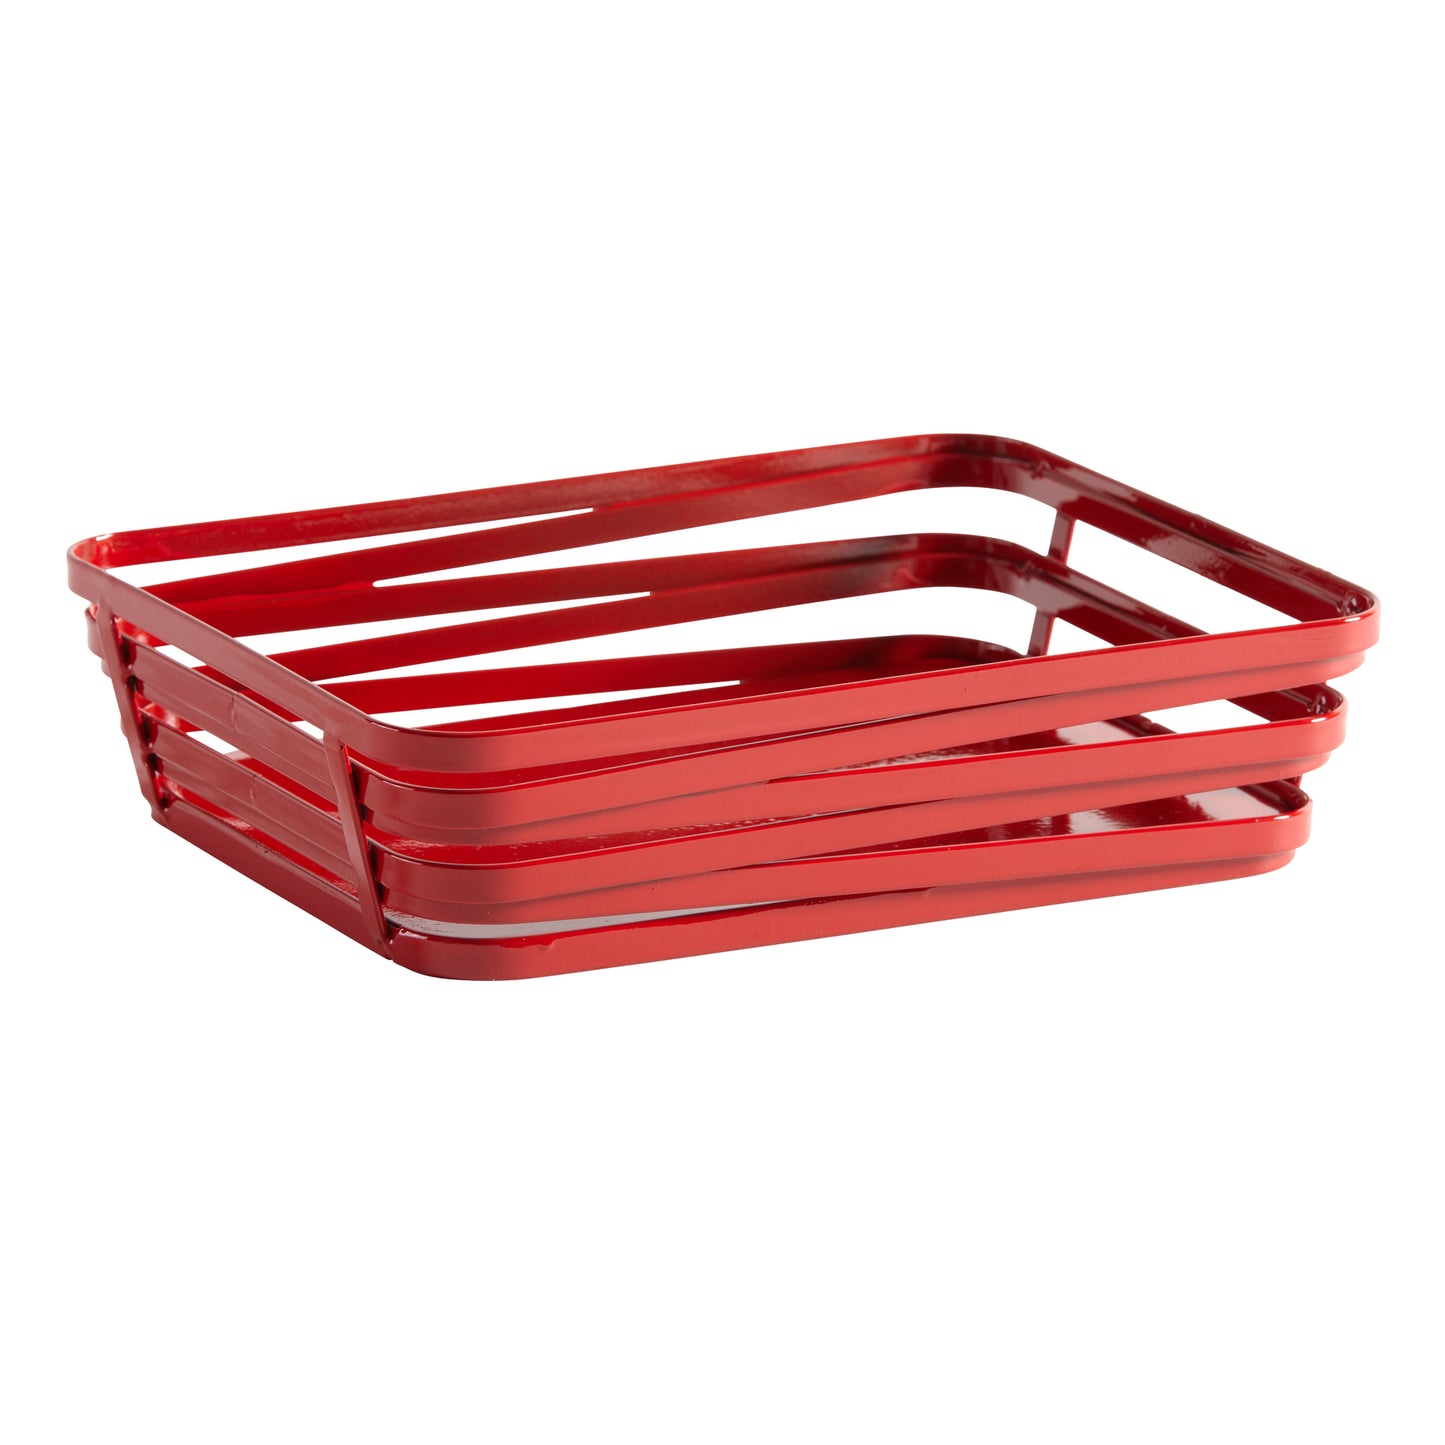 9" x 7" Rectangular Red Wire Food Serving Basket, Cyclone, 2.25" tall